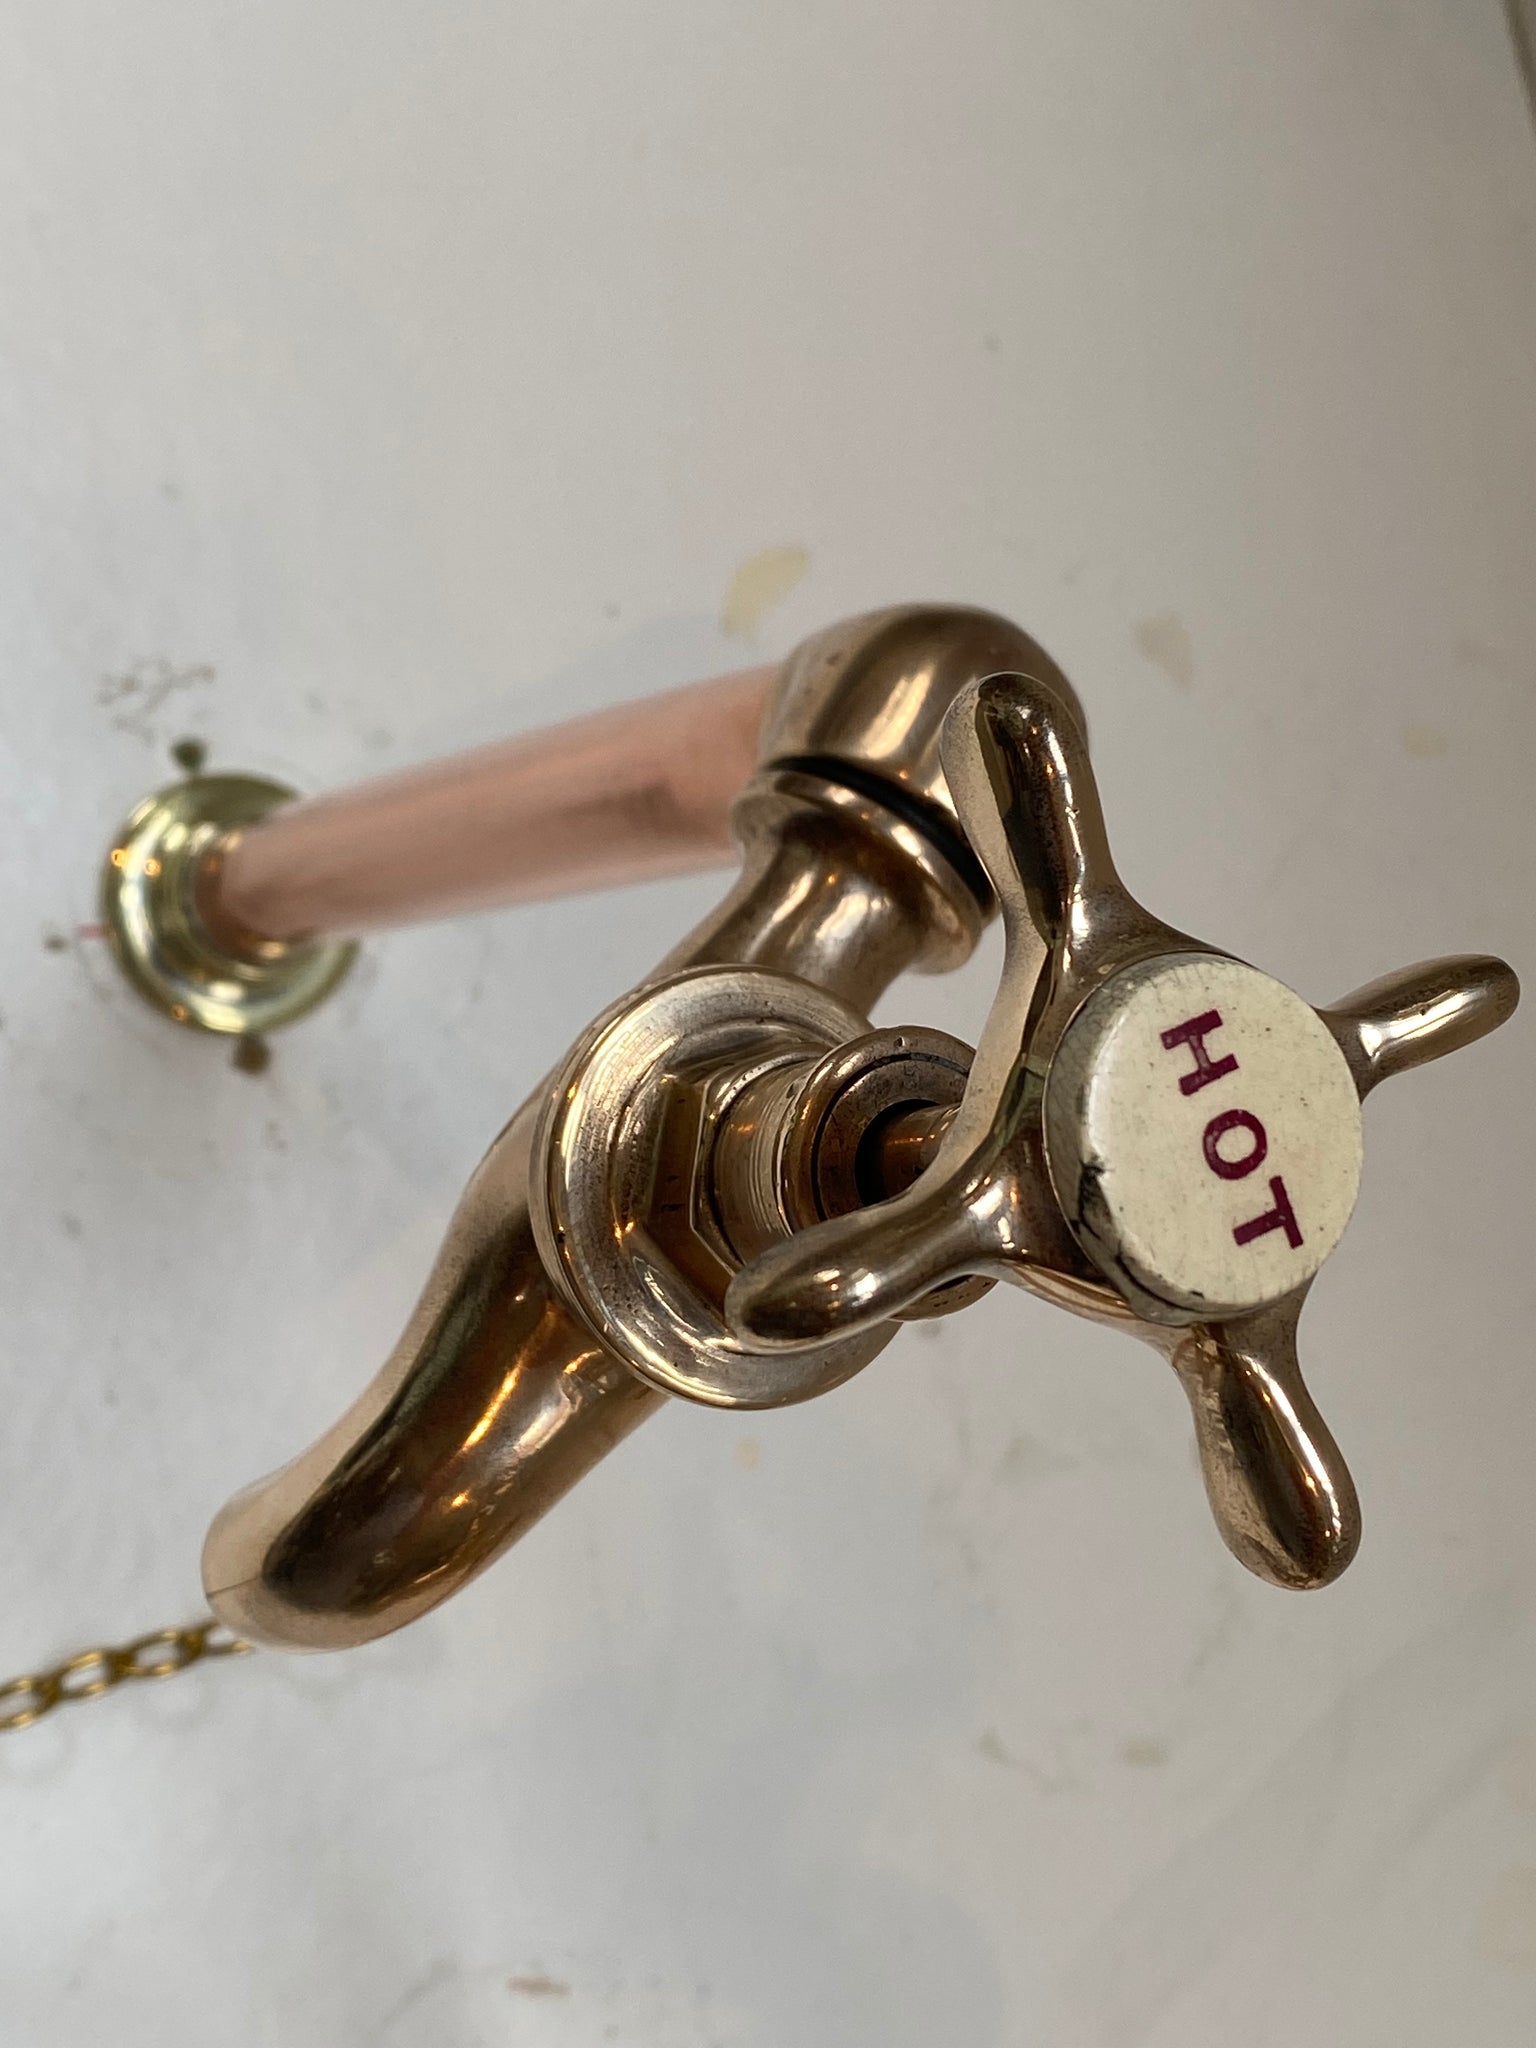 victorian bib-taps on copper pedestals with unusual red lettering c.1890